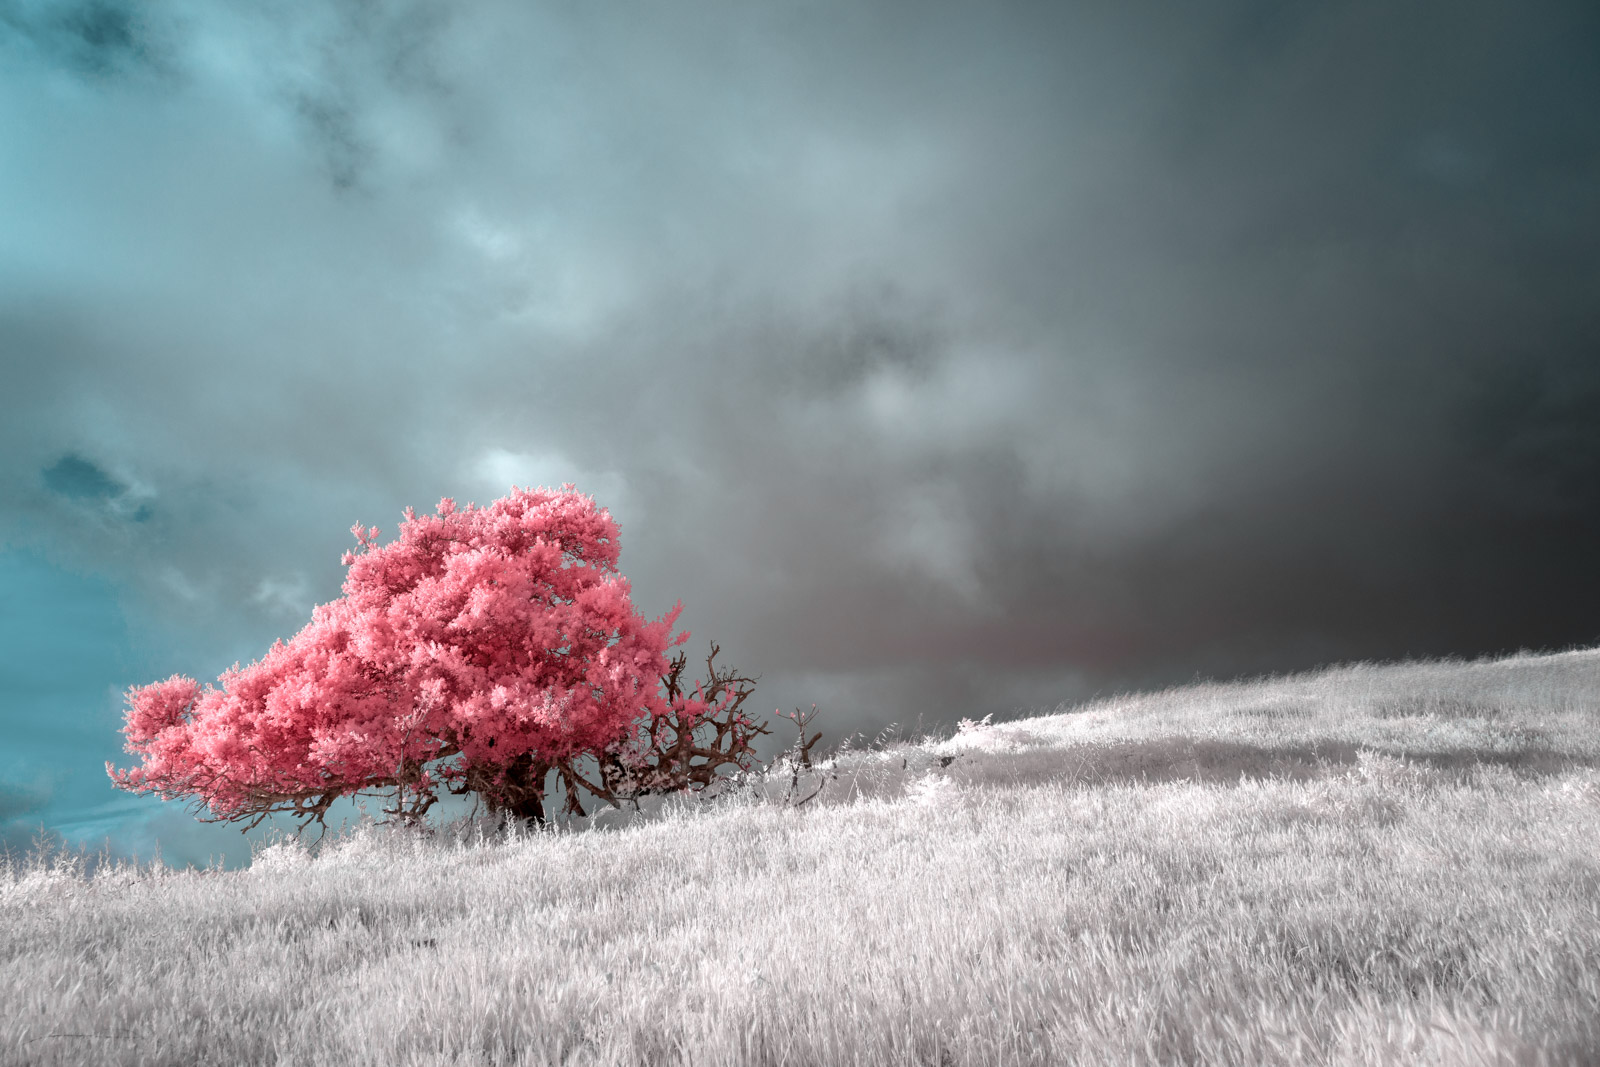 A pink tree and silver grass catch the light beneath a passing storm cloud.